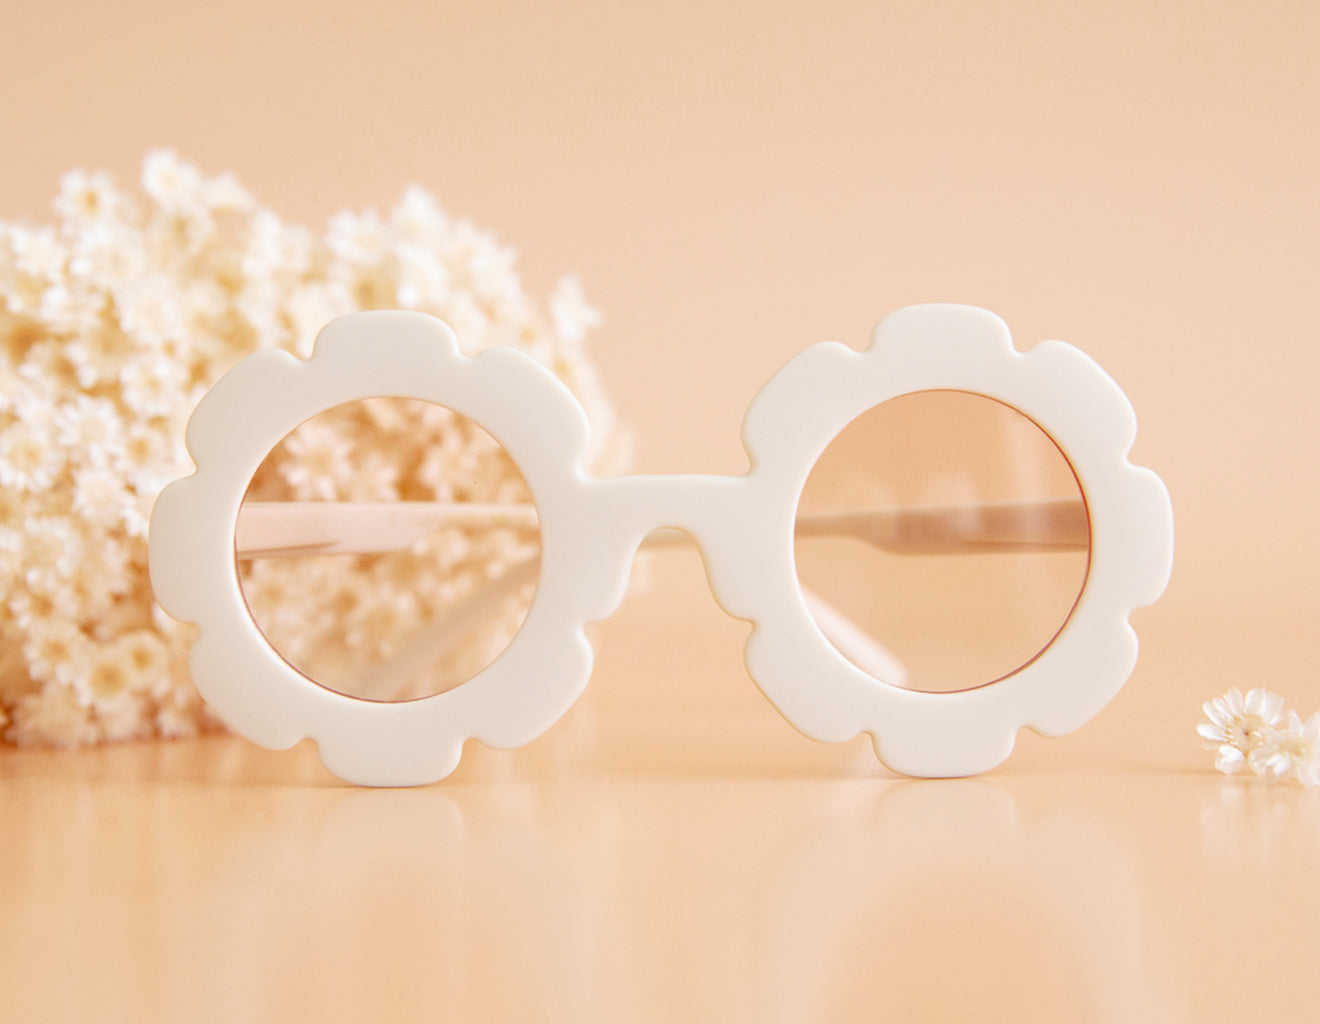 On a peachy background is a white flower shaped pair of sunglasses with a light pink lens, photographed next to ivory dried florals. 